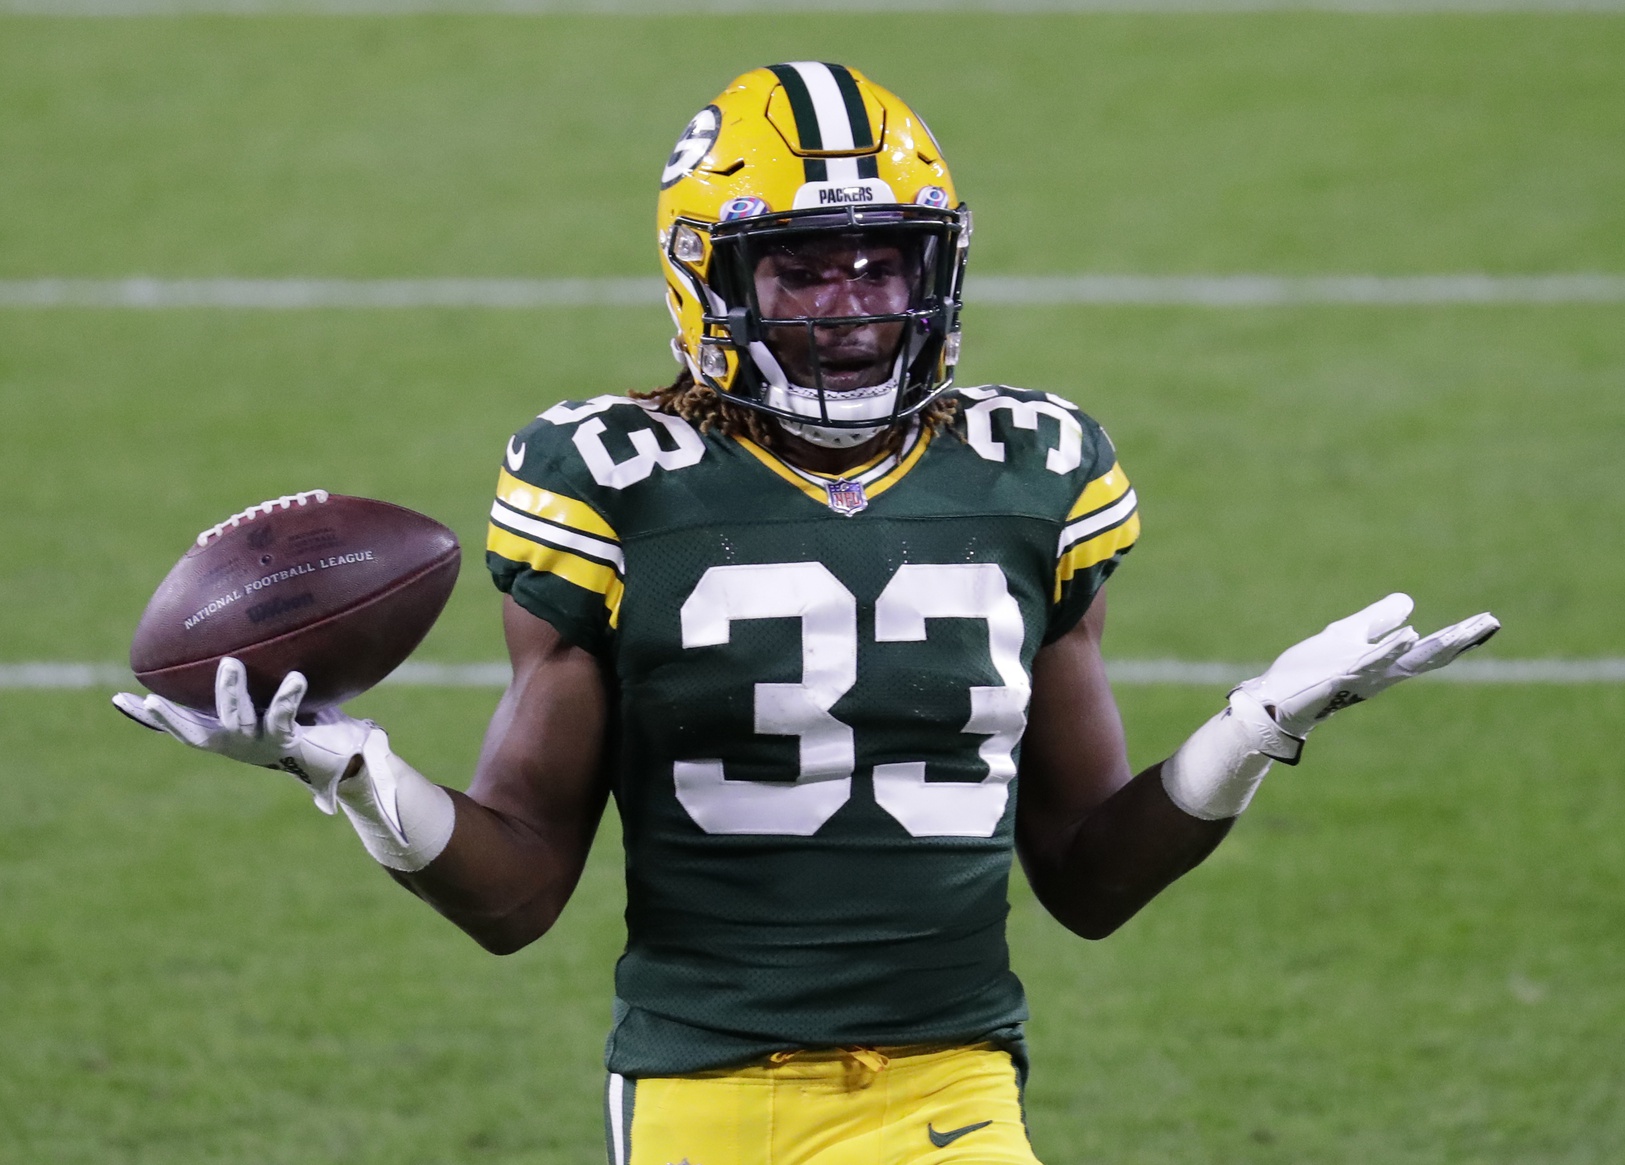 Packers Film Room: Aaron Jones and AJ Dillon on the Field at the